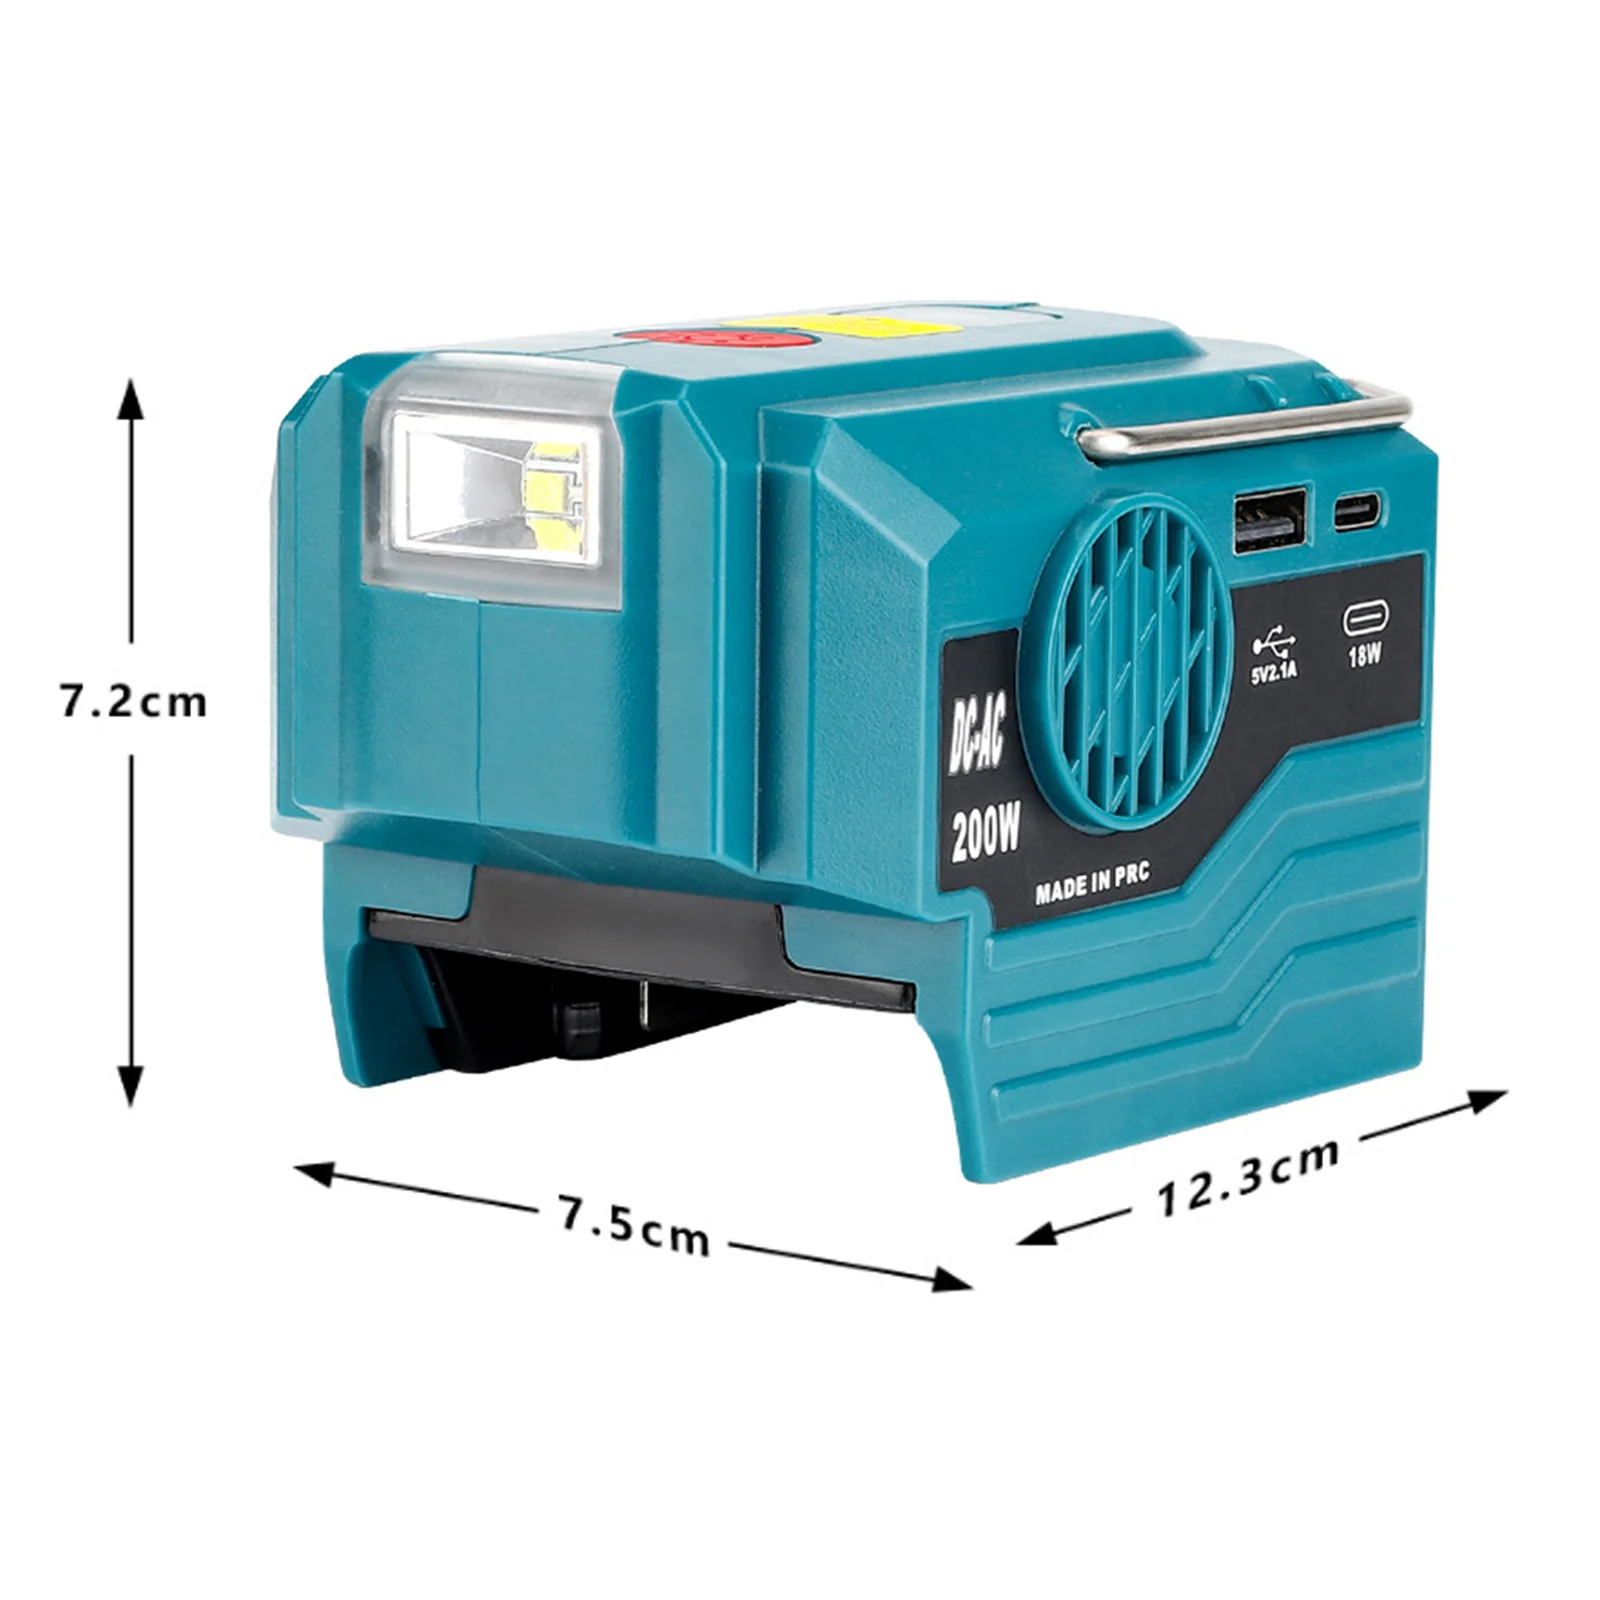  200W Power Inverter for Makita 18V Battery (Battery NOT  Included) Portable Power Station w/AC Outlet USB-A Type-C Ports LED Light  Outdoor Generator for Road Trip, Home Emergency, Laptop etc. : Patio